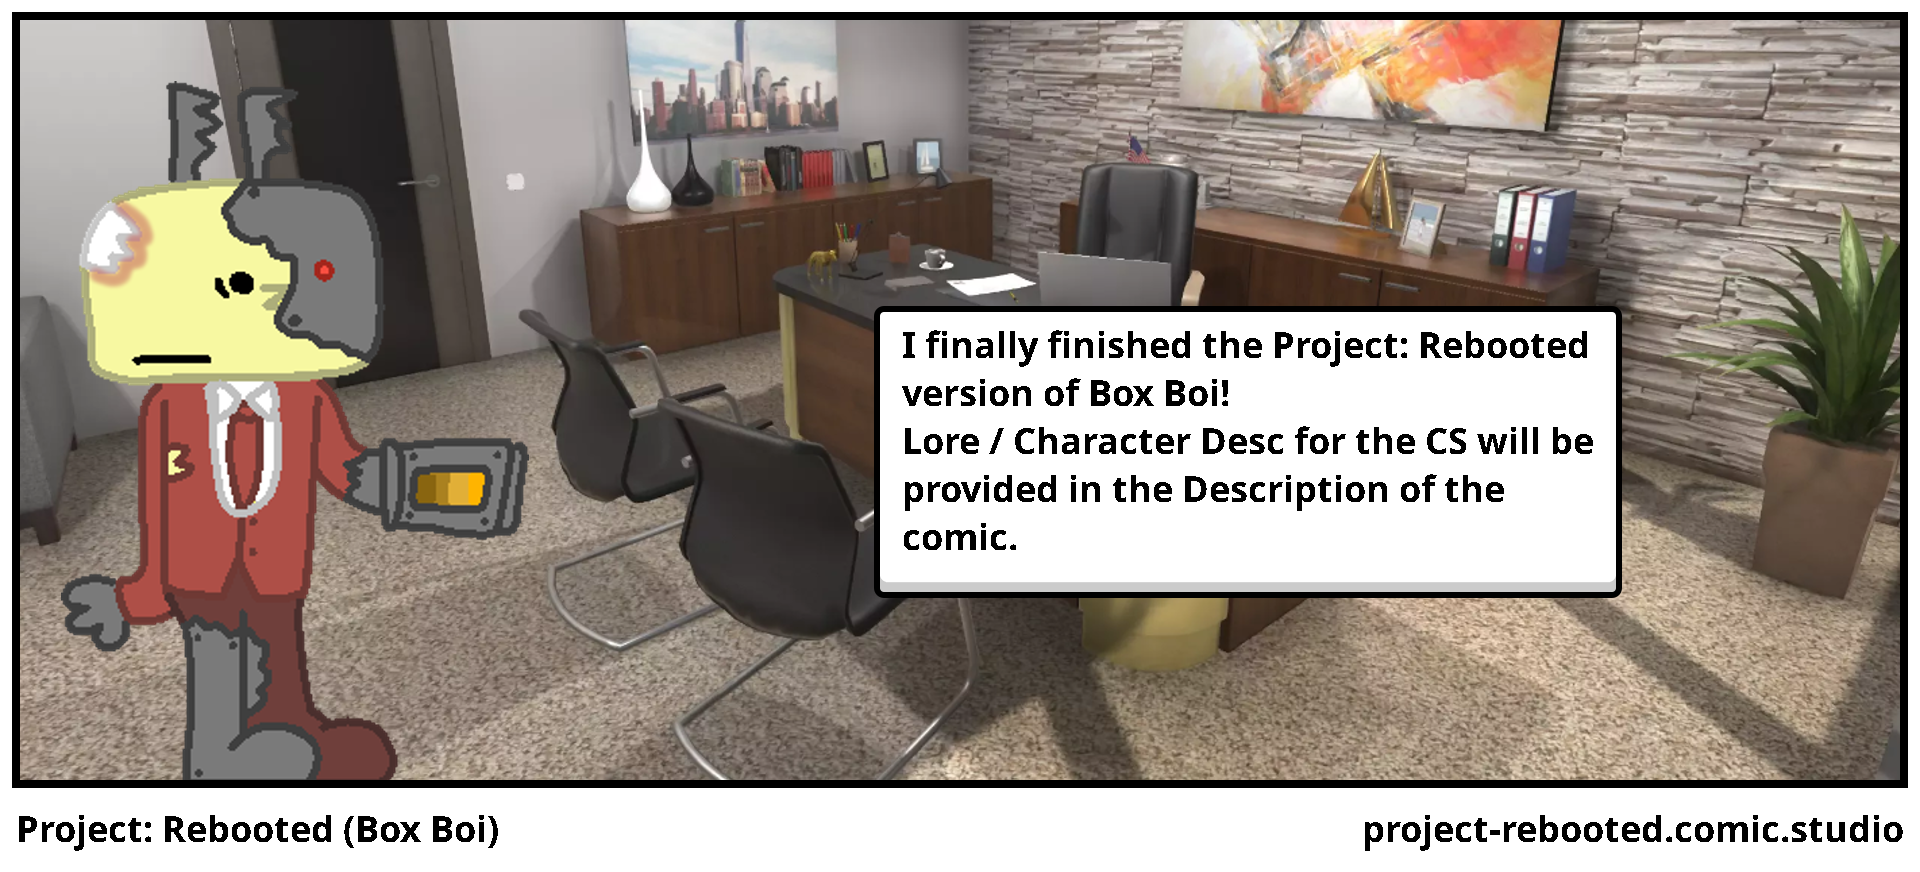 Project: Rebooted (Box Boi)